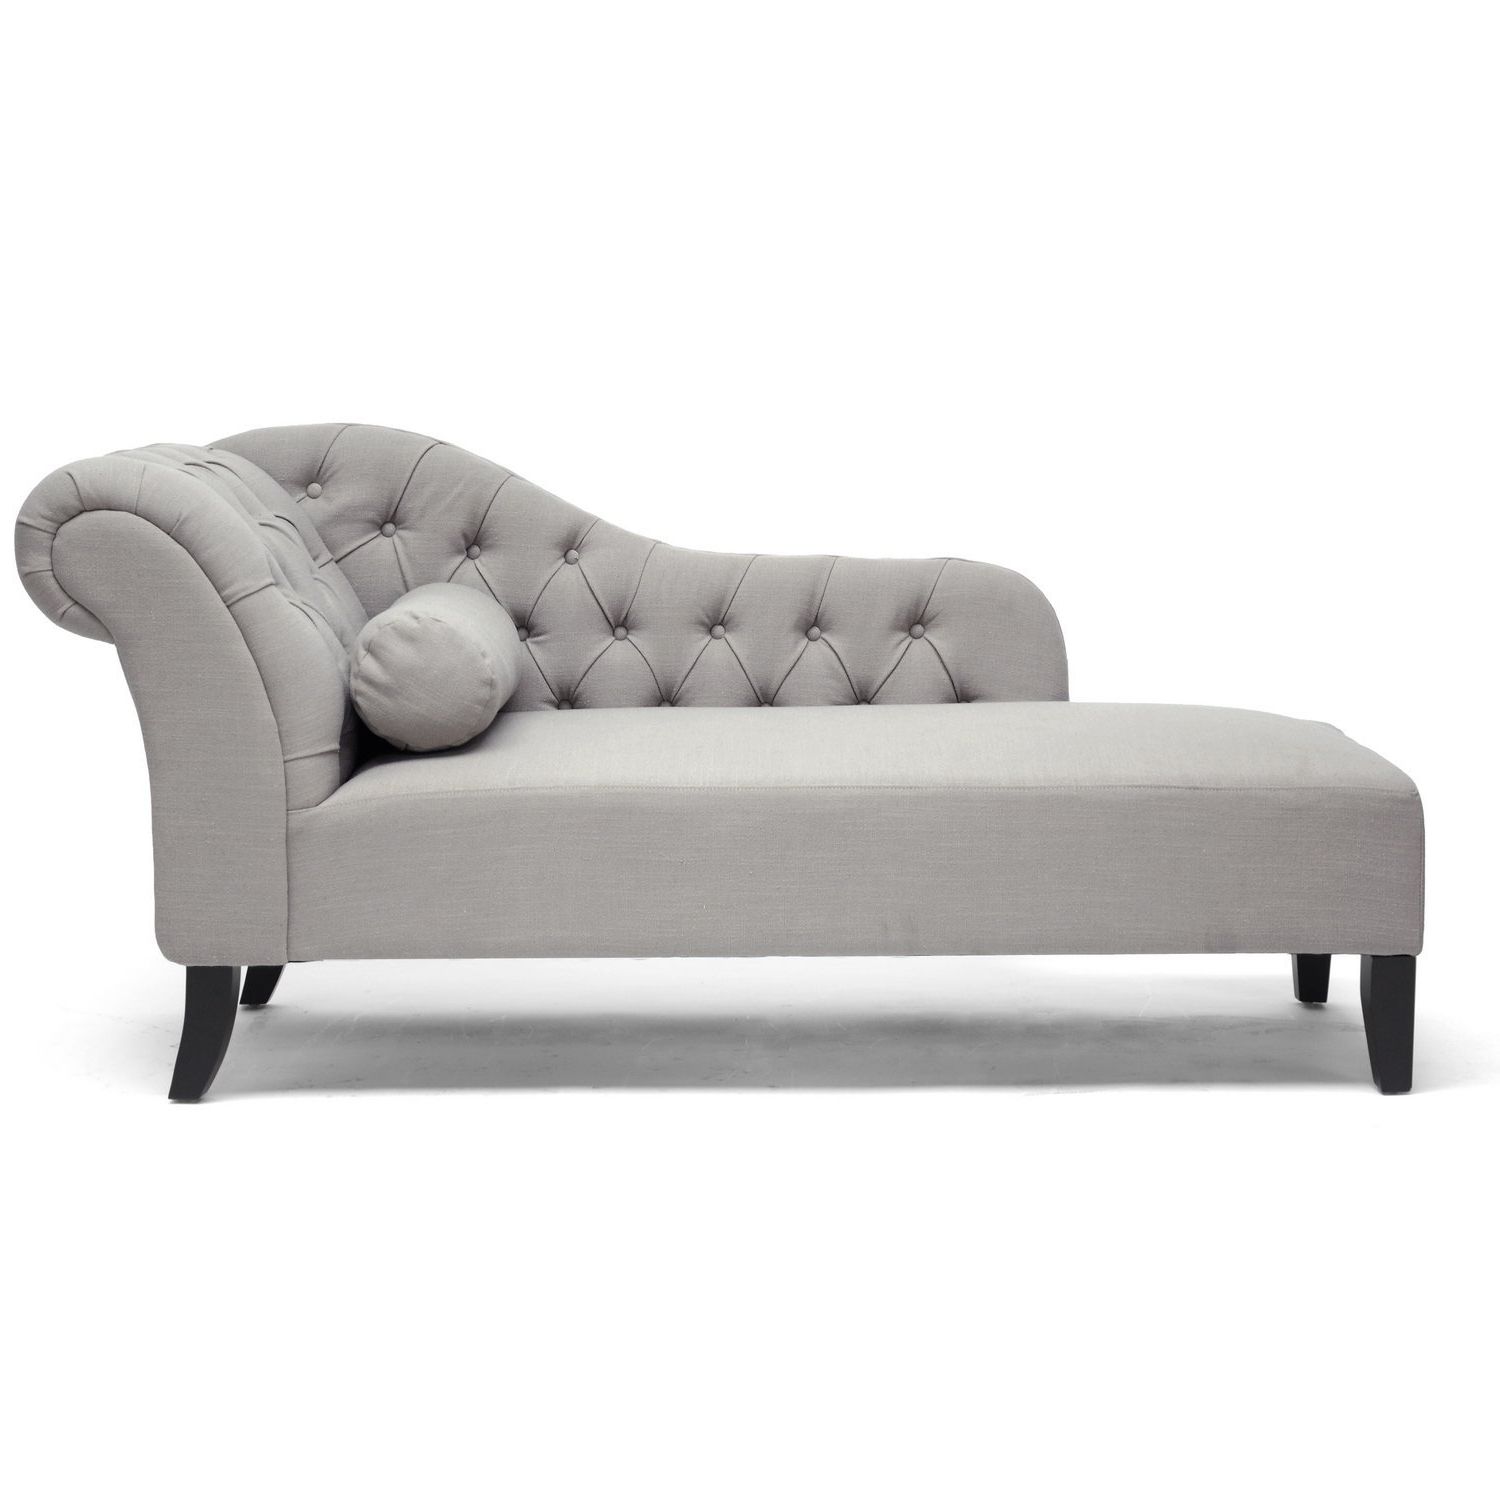 Amazon: Baxton Studio Aphrodite Tufted Putty Linen Modern In Most Up To Date Modern Chaise Lounges (View 11 of 15)